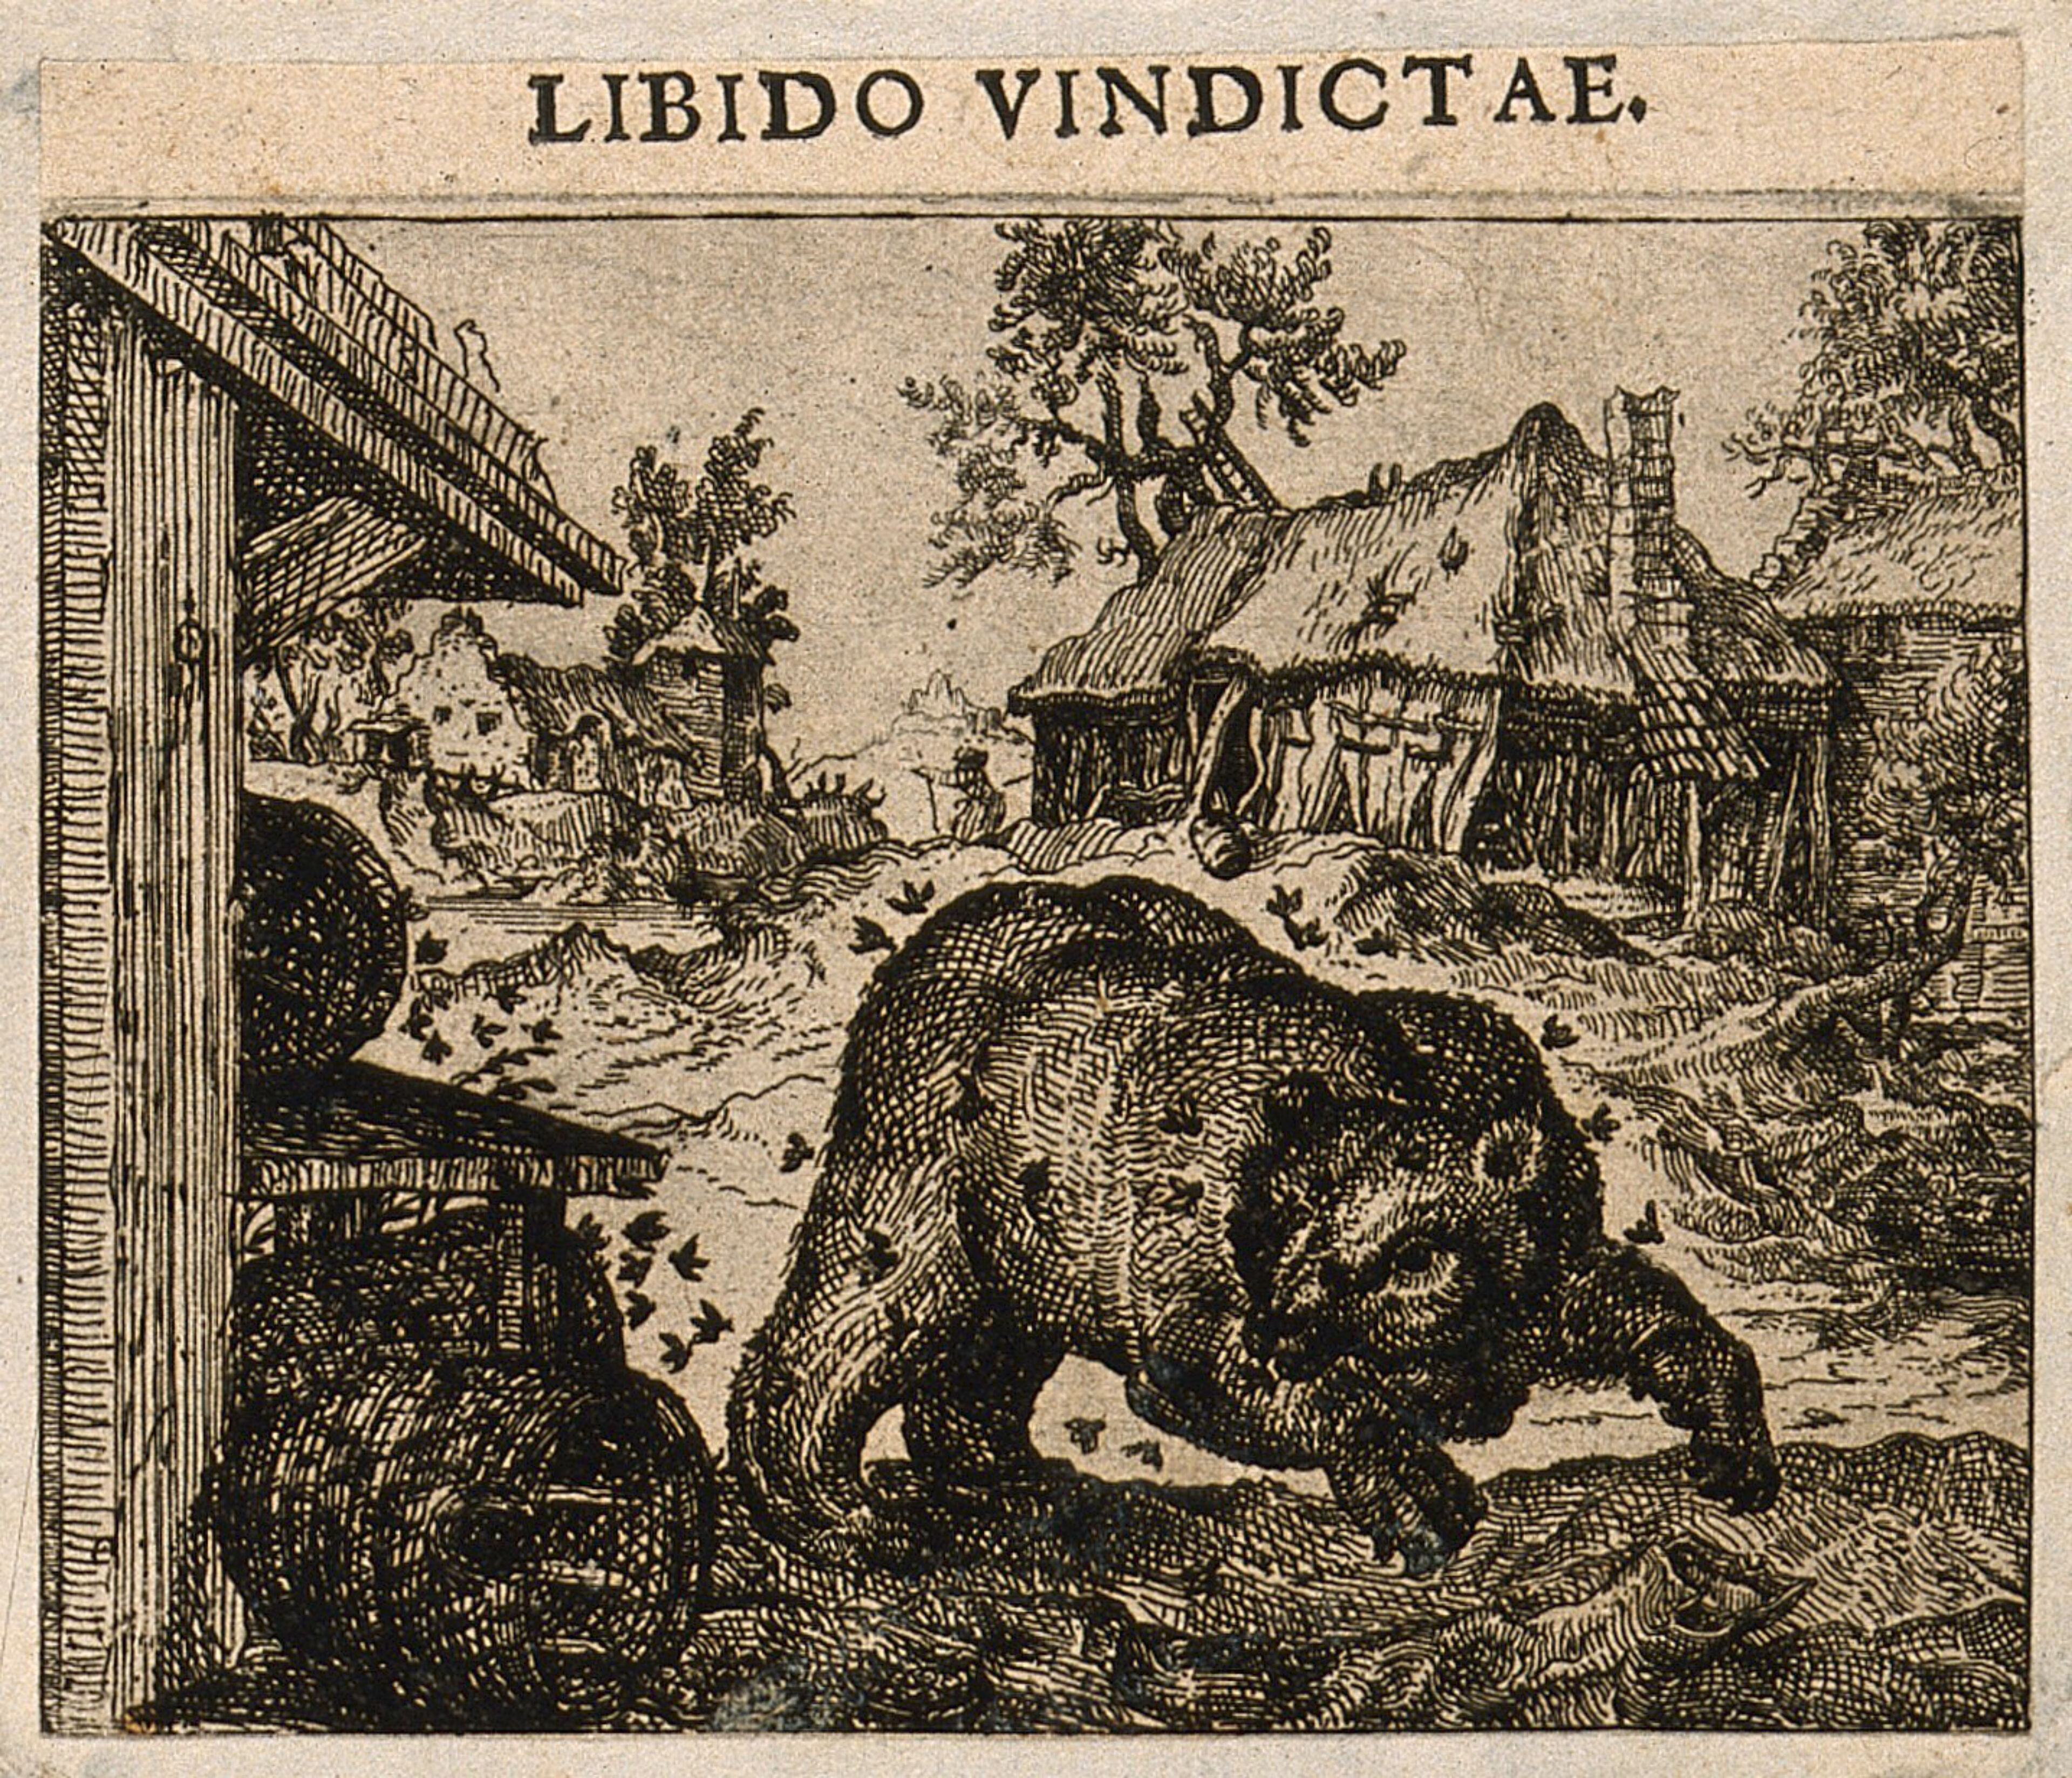 A bear overturns a barrel and is stung by bees; representing Aesop's fable. Etching by C. Murer after himself, c. 1600-1614.